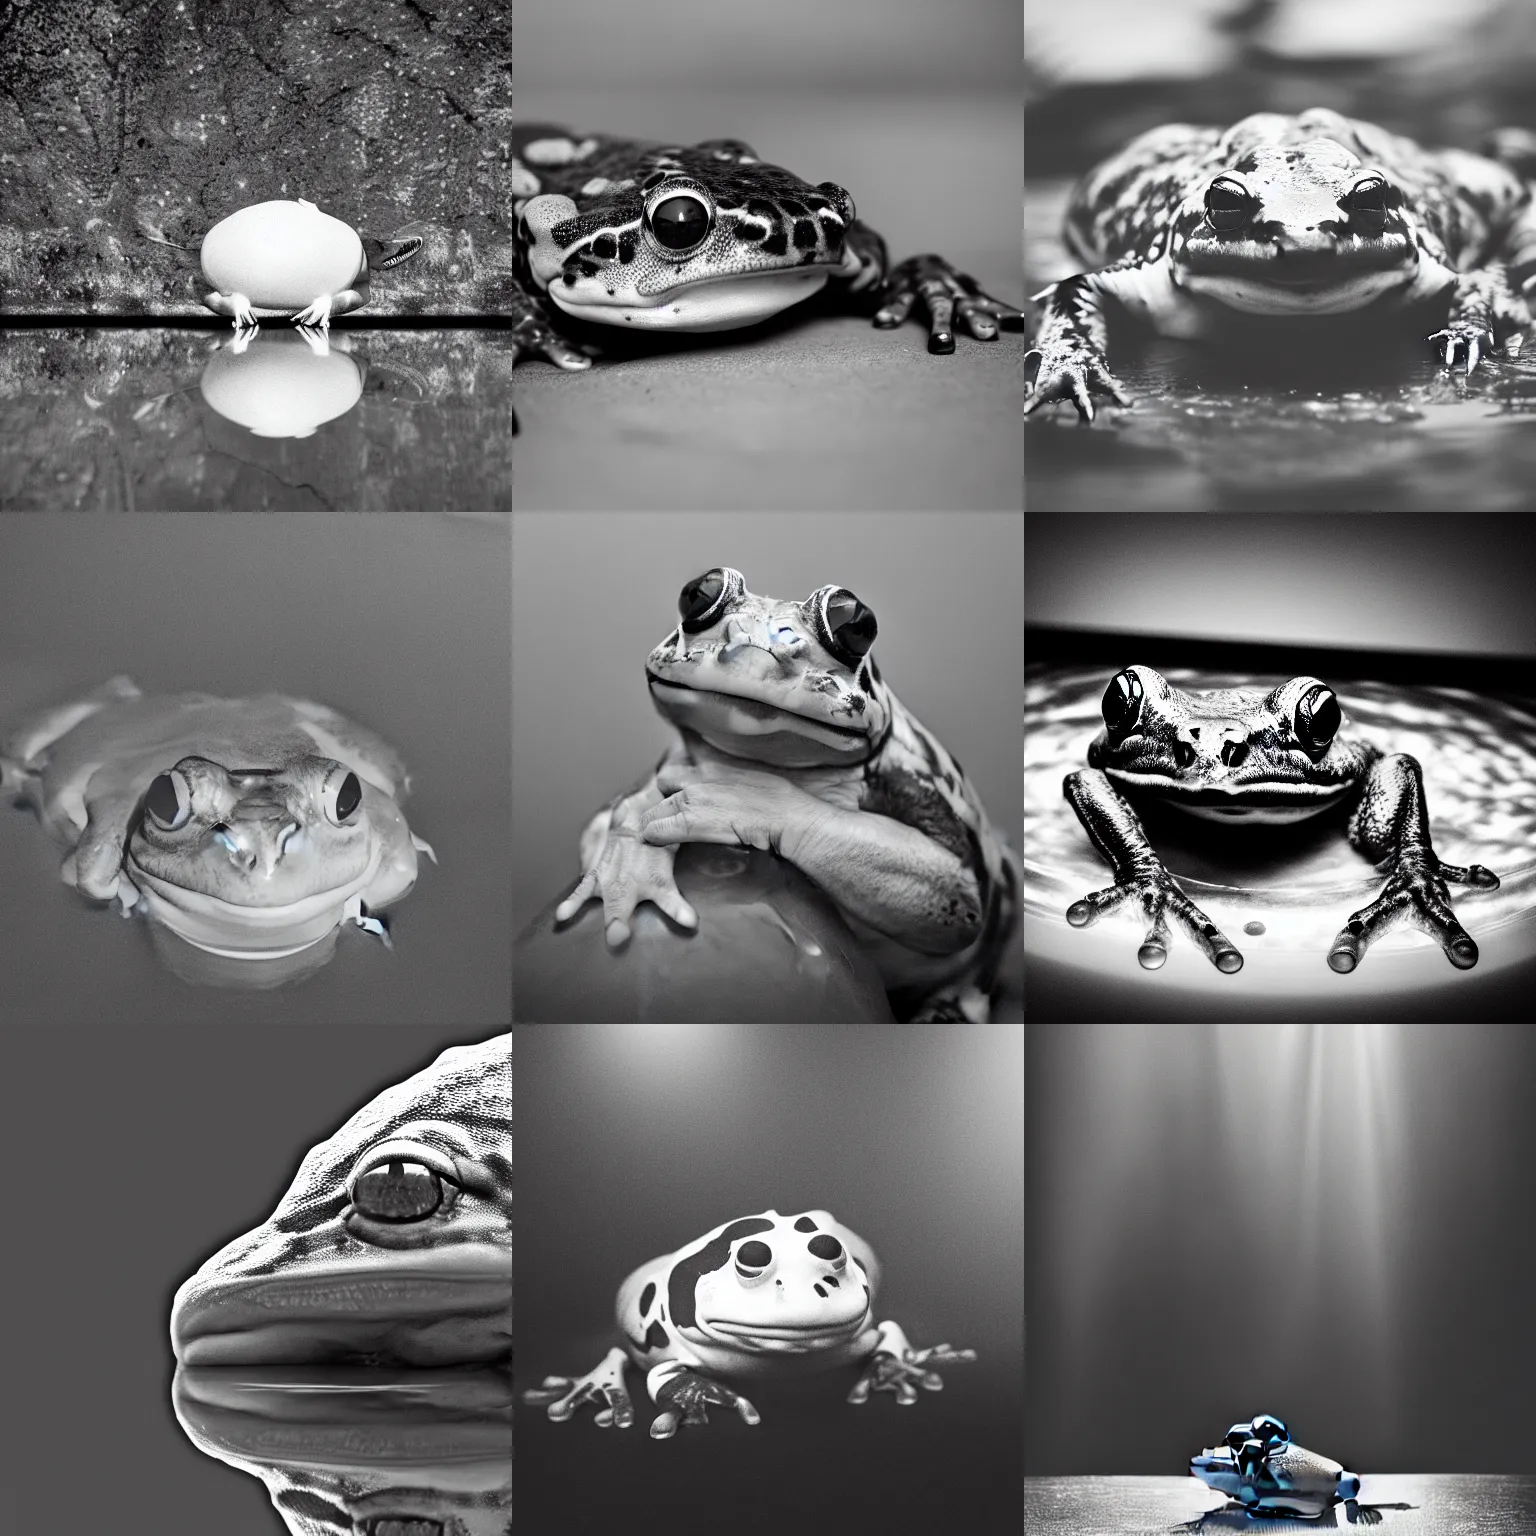 Prompt: Monochrome photo of a big frog. The frog has 10 eyes. The frog sits on top of a backlit glass sphere